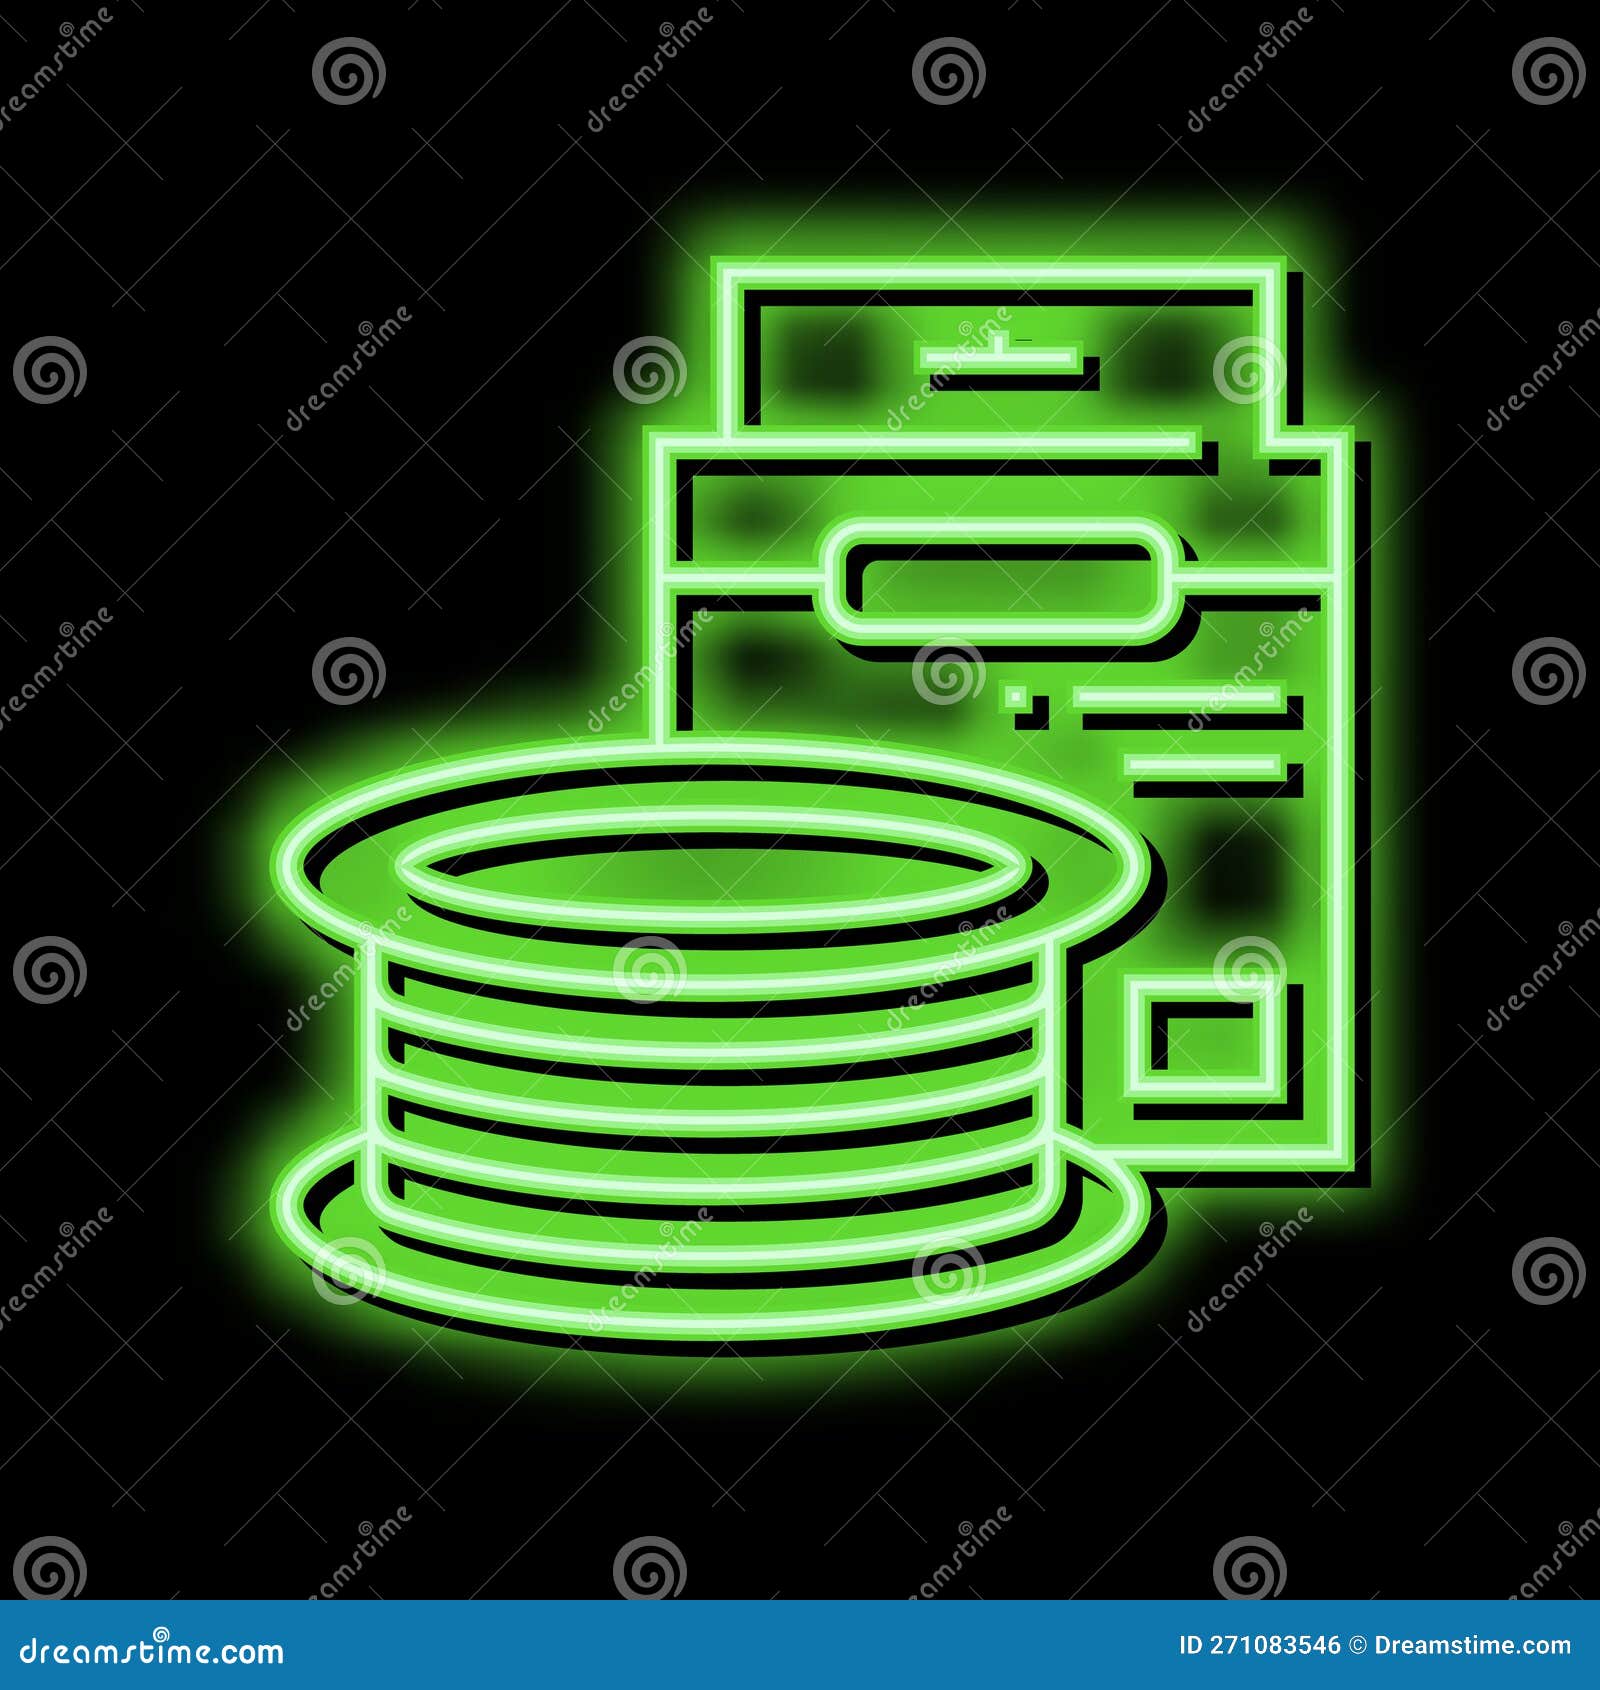 Braid Fishing Line Neon Glow Icon Illustration Stock Vector - Illustration  of store, products: 271083546